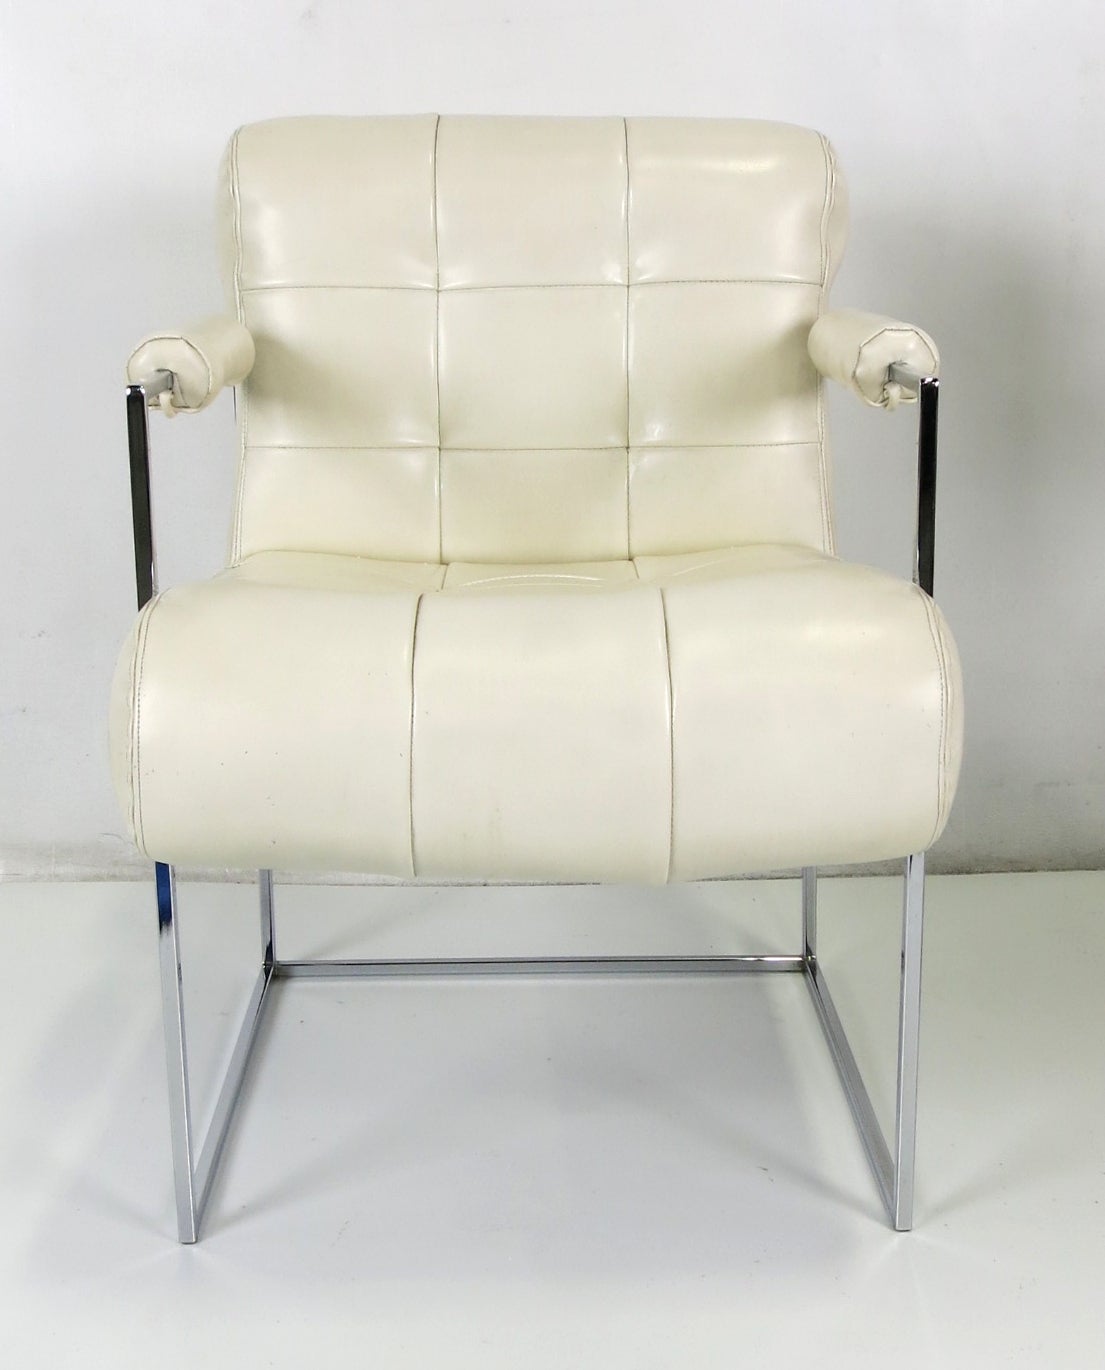 Pair of Classic lounge chairs or dining armchairs by Milo Baughman for Thayer Coggin in their original vinyl upholstery. The frames are in beautiful mint condition.